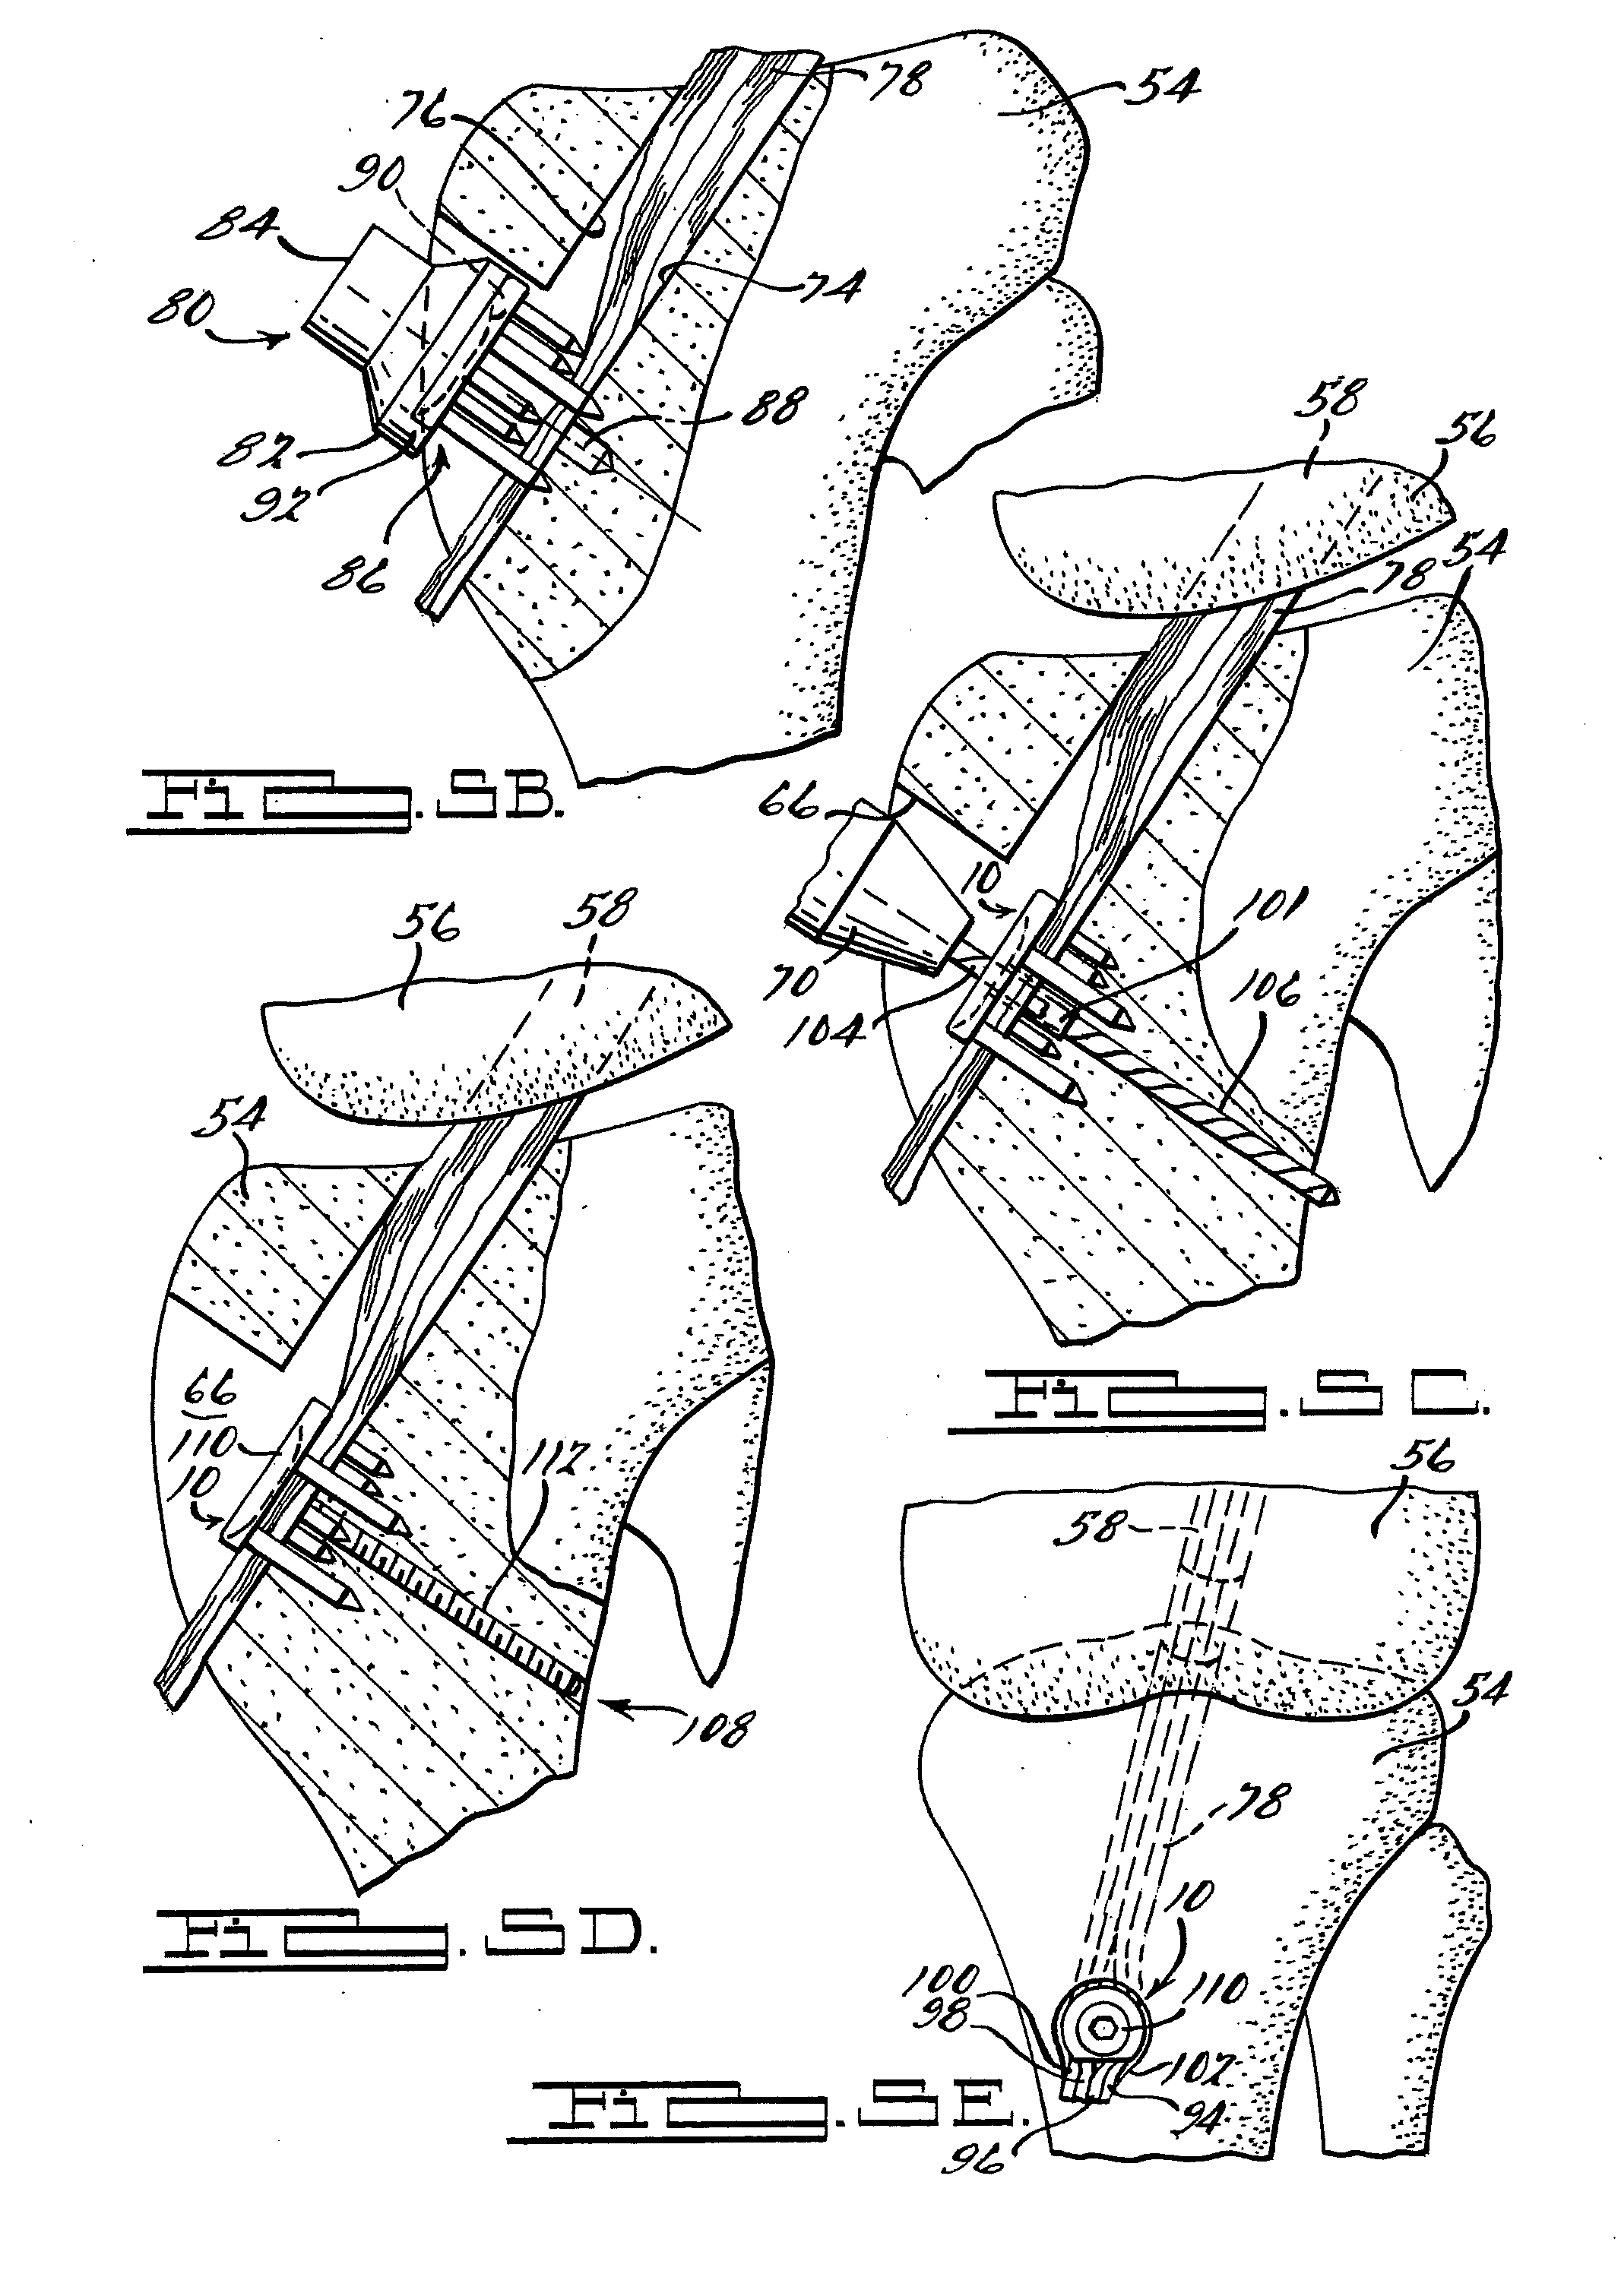 Apparatus and Method for Tibial Fixation of Soft Tissue